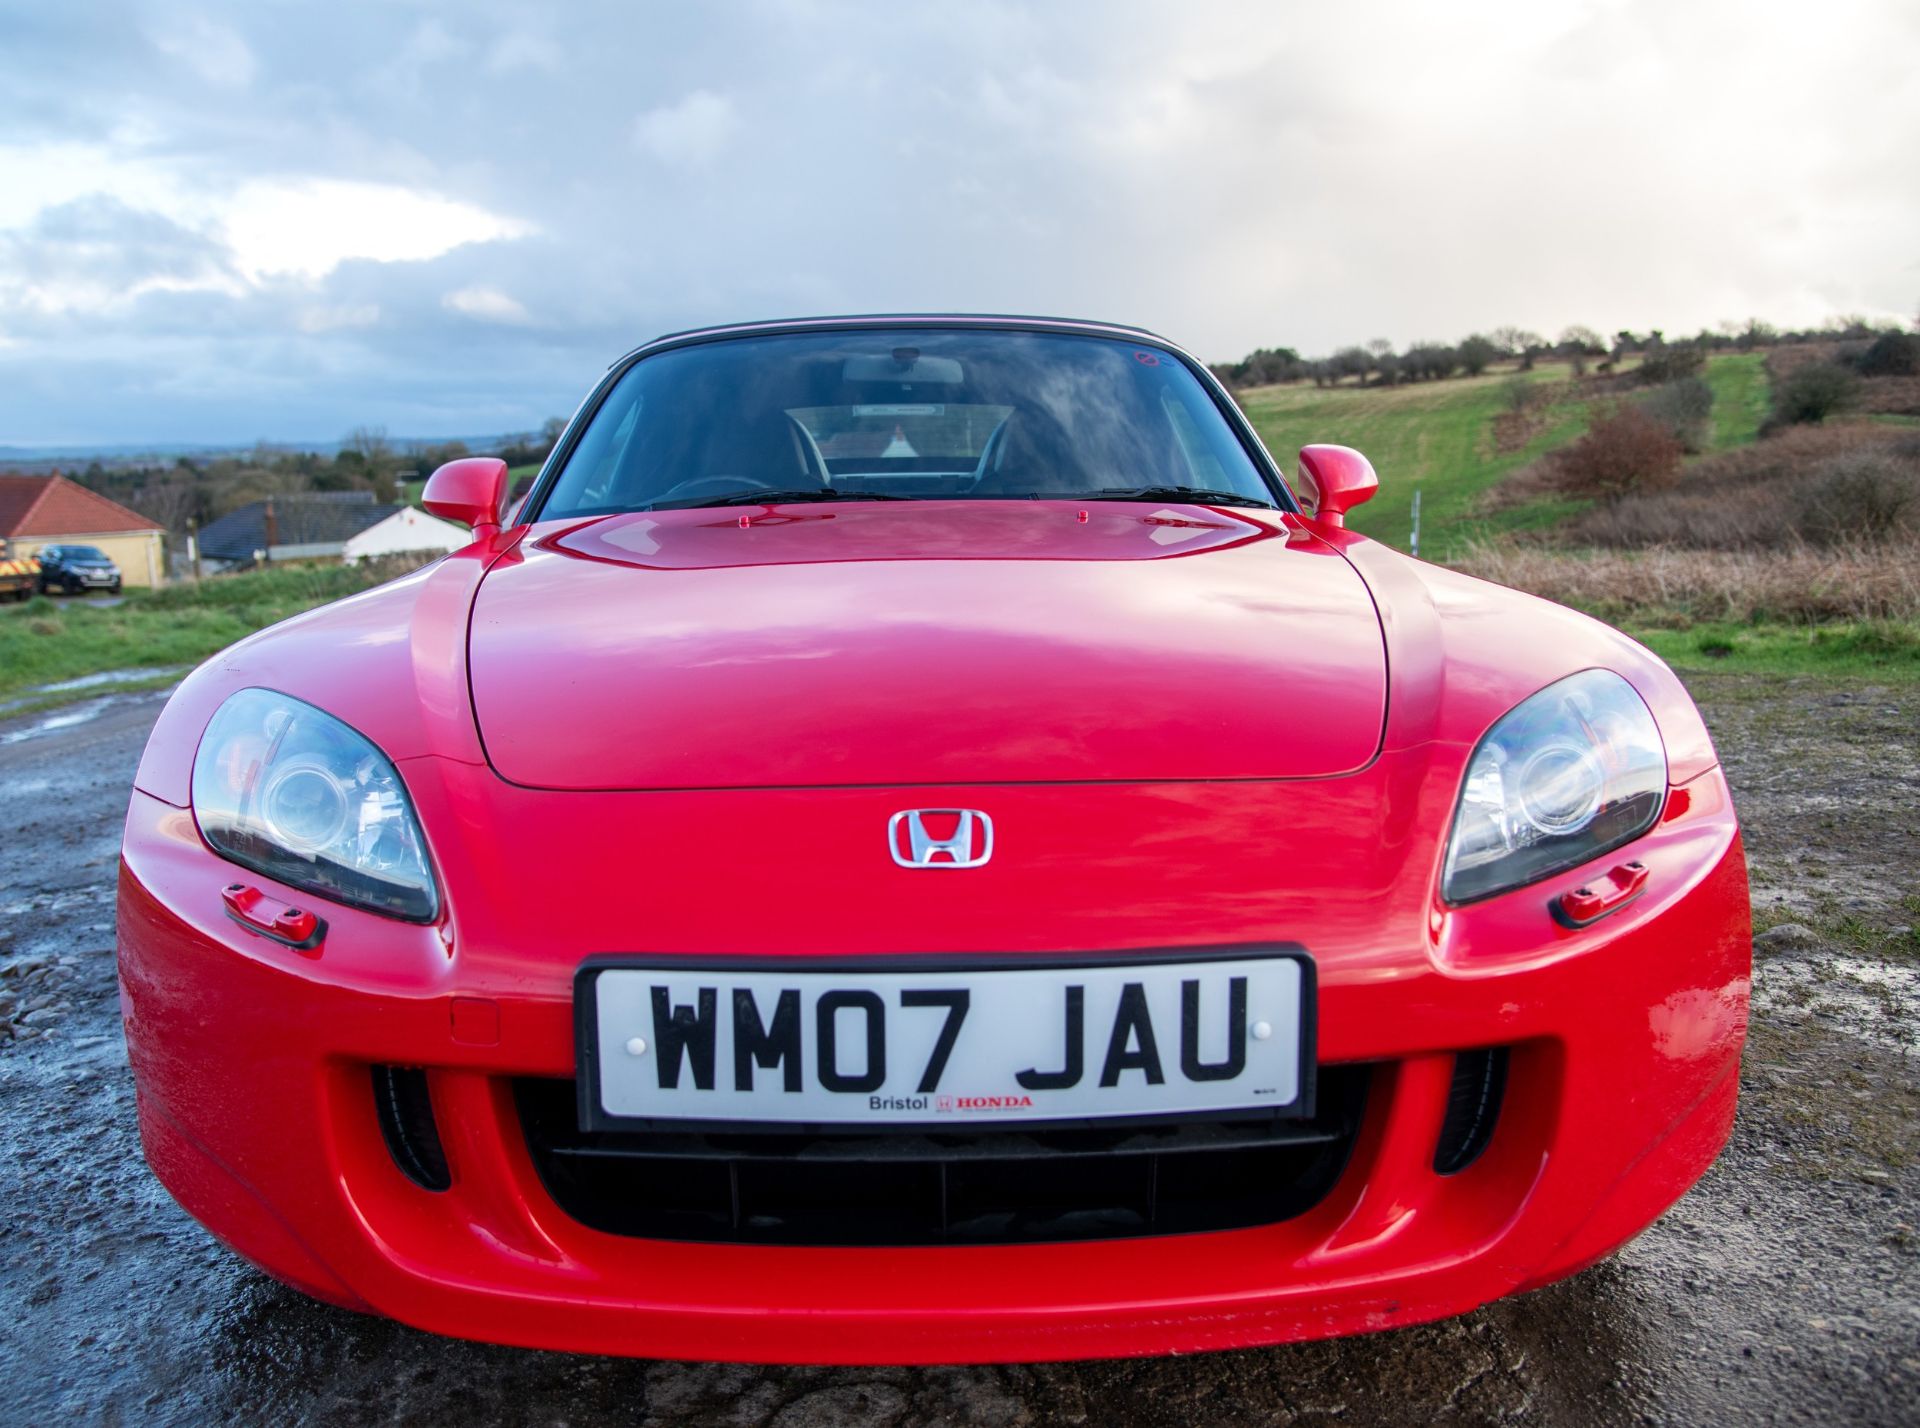 2007 HONDA S2000 Registration Number: WM07 JAU Chassis Number: JHMAP11207S200009 Recorded Mileage: - Image 14 of 26